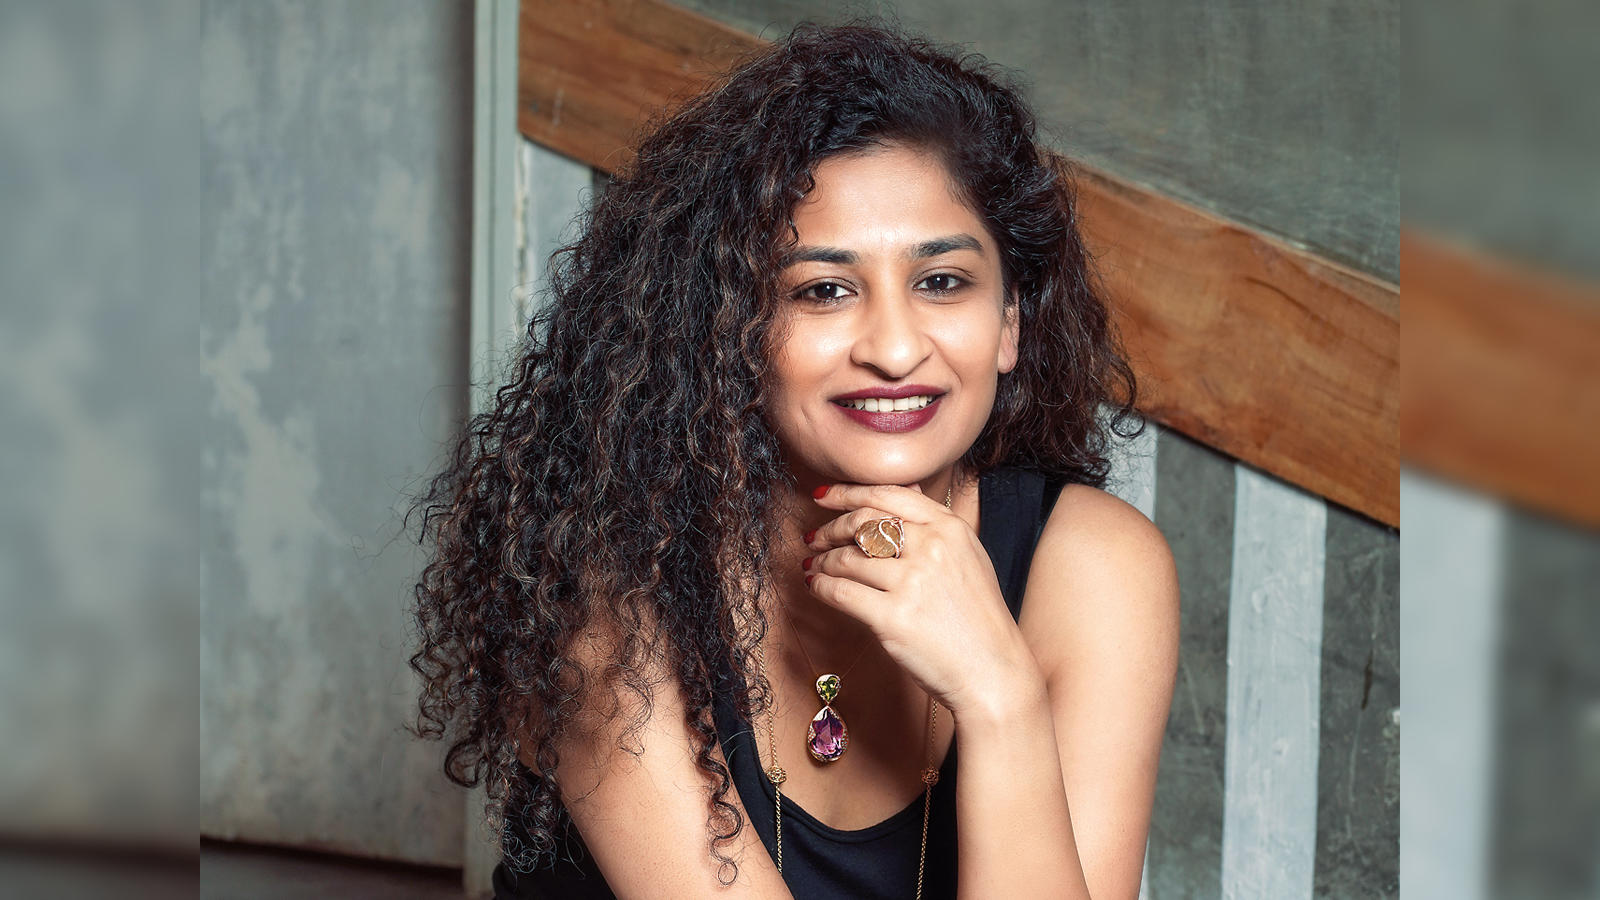 Dear Zindagi: Life inspires Gauri Shinde; 'English Vinglish' director says amazing experiences don't take place in an office setup - The Economic Times